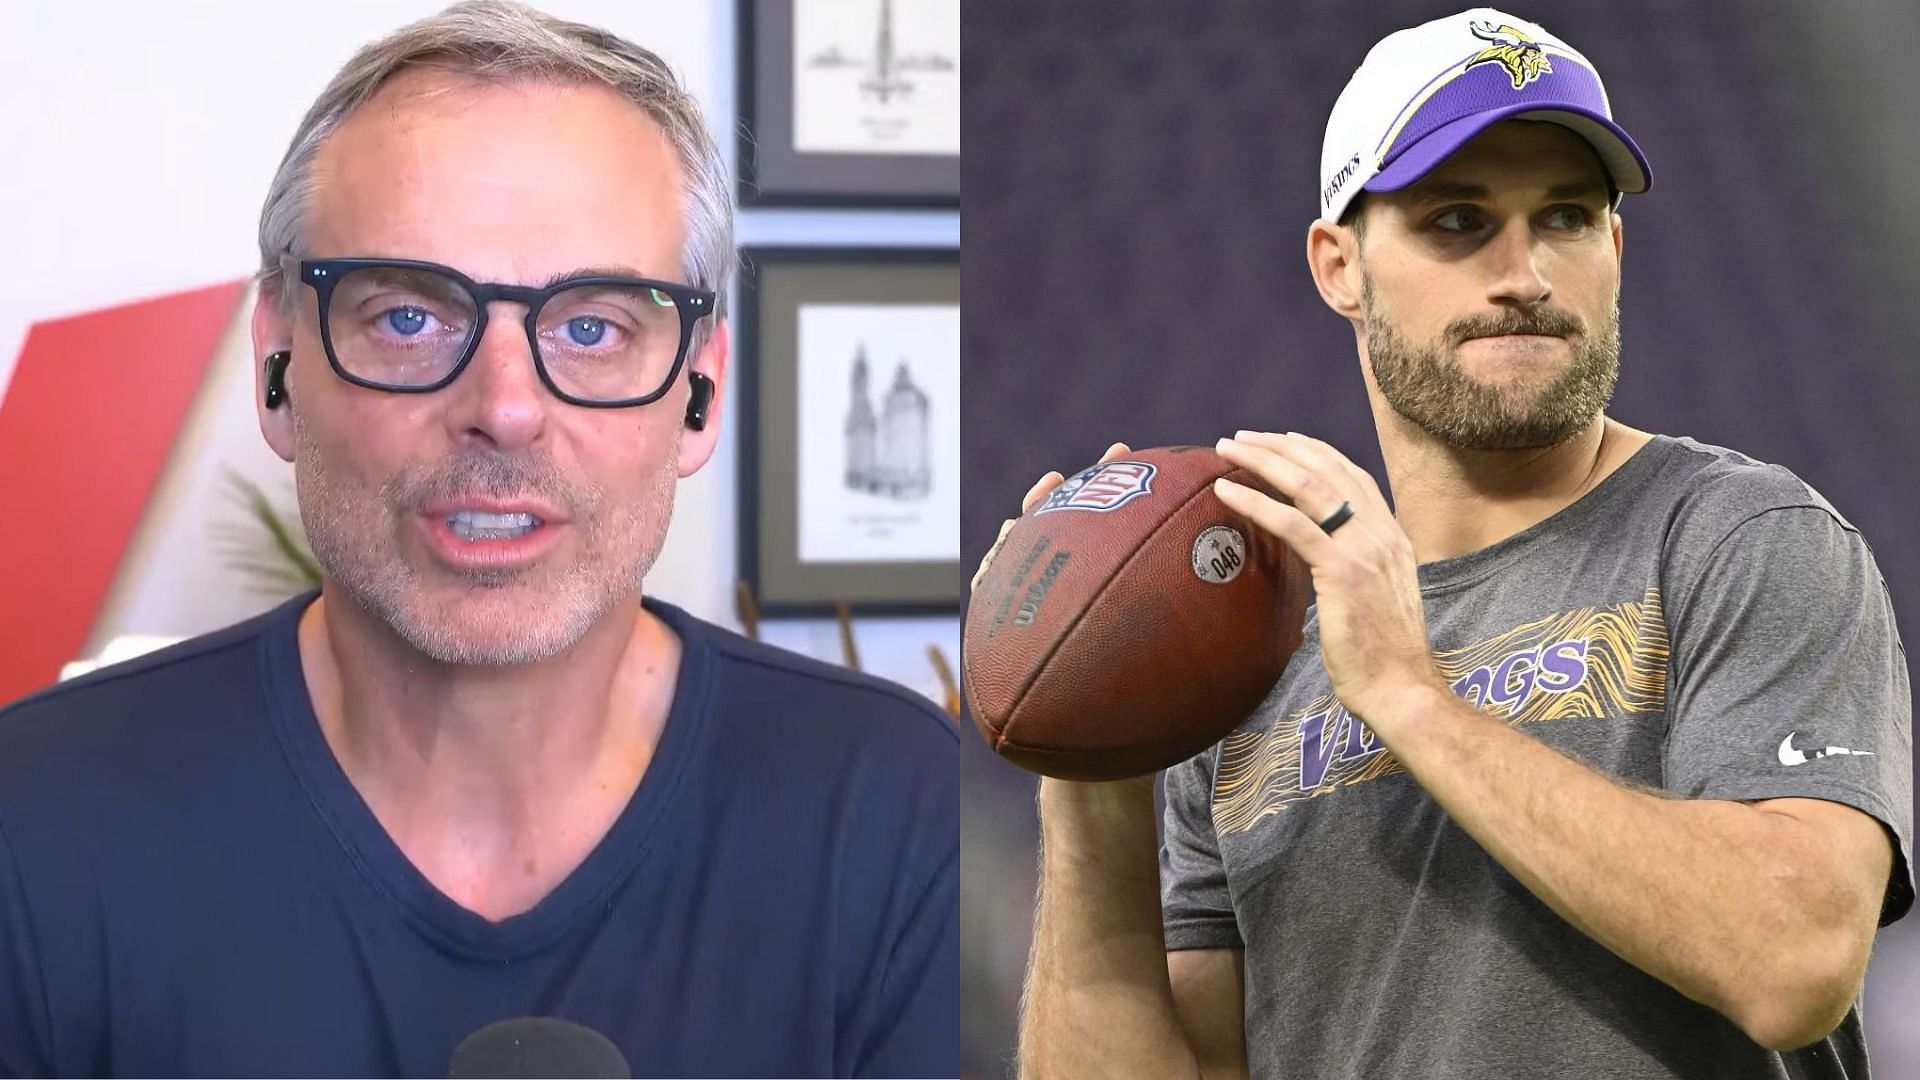 Colin Cowherd and Kirk Cousins (Image credit: The Volume on YouTube)